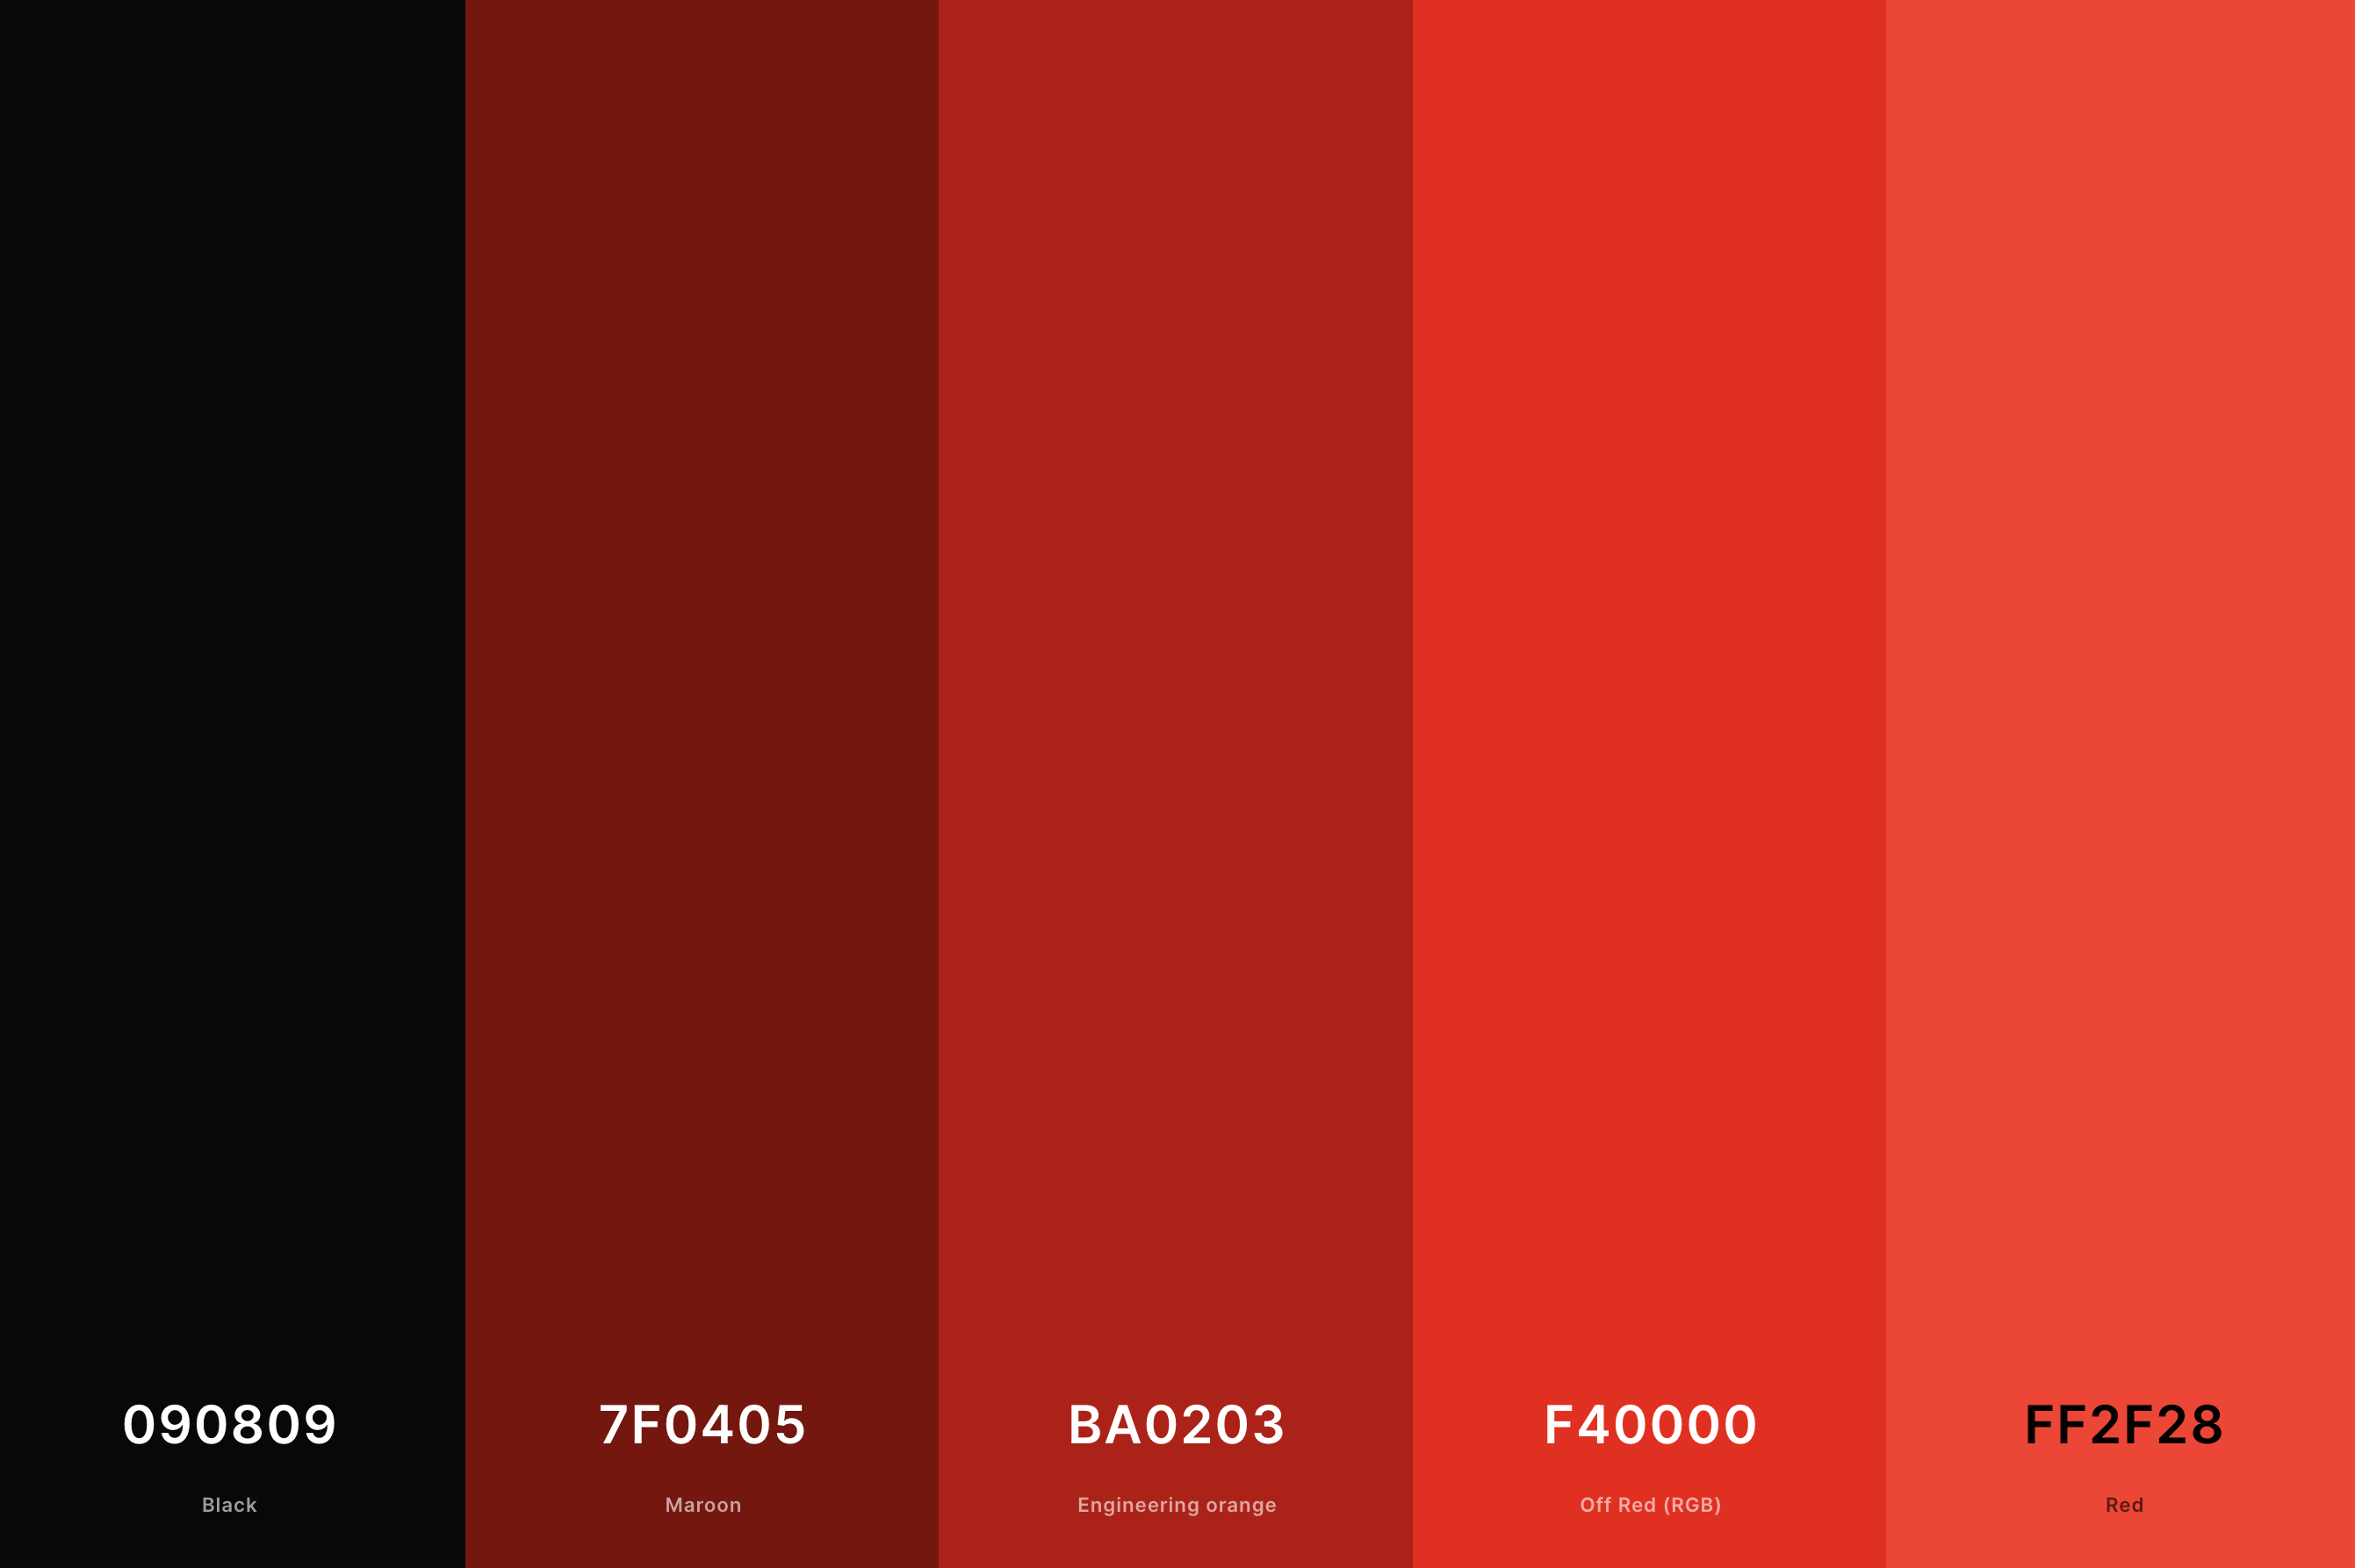 1. Black And Red Color Palette Color Palette with Black (Hex #090809) + Maroon (Hex #7F0405) + Engineering Orange (Hex #BA0203) + Off Red (Rgb) (Hex #F40000) + Red (Hex #FF2F28) Color Palette with Hex Codes